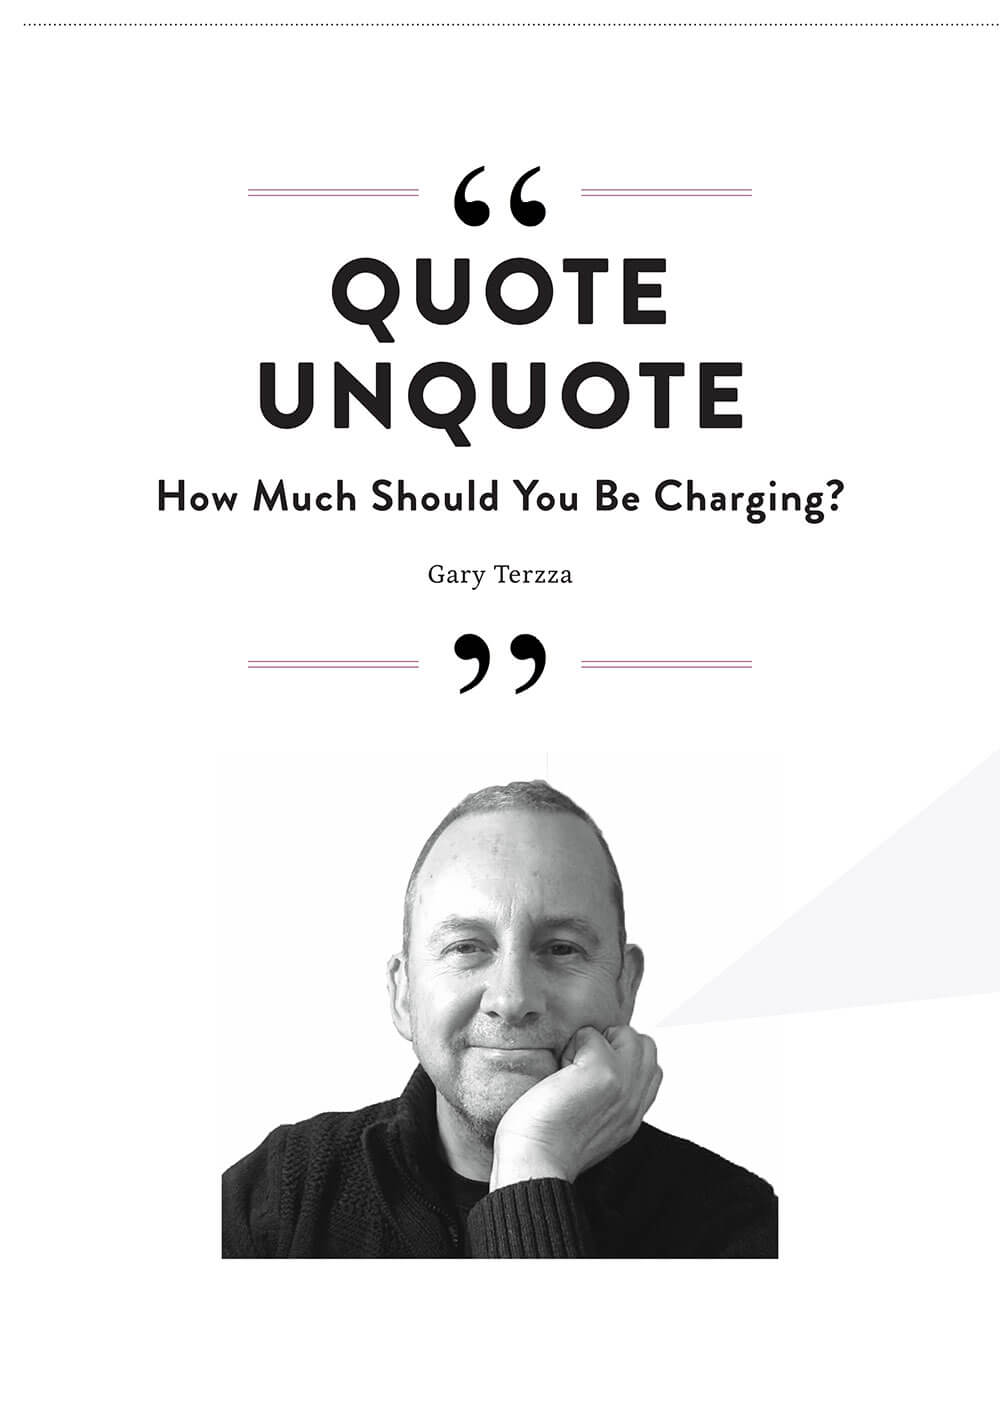 How much should you be charging by Gary Terzza